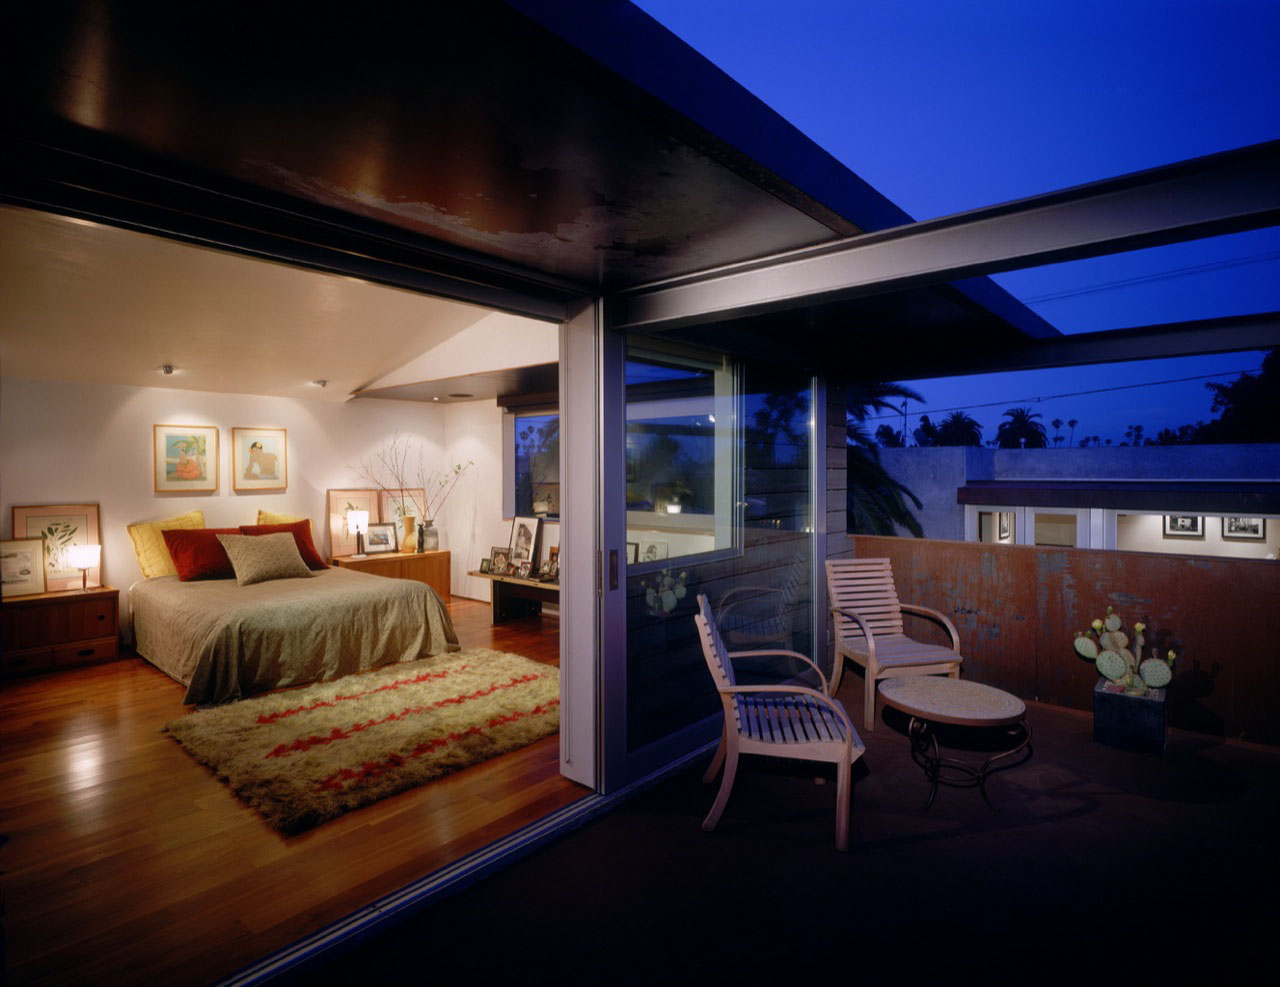 Master Bedroom of 700 Palms Residence by Ehrlich Architects